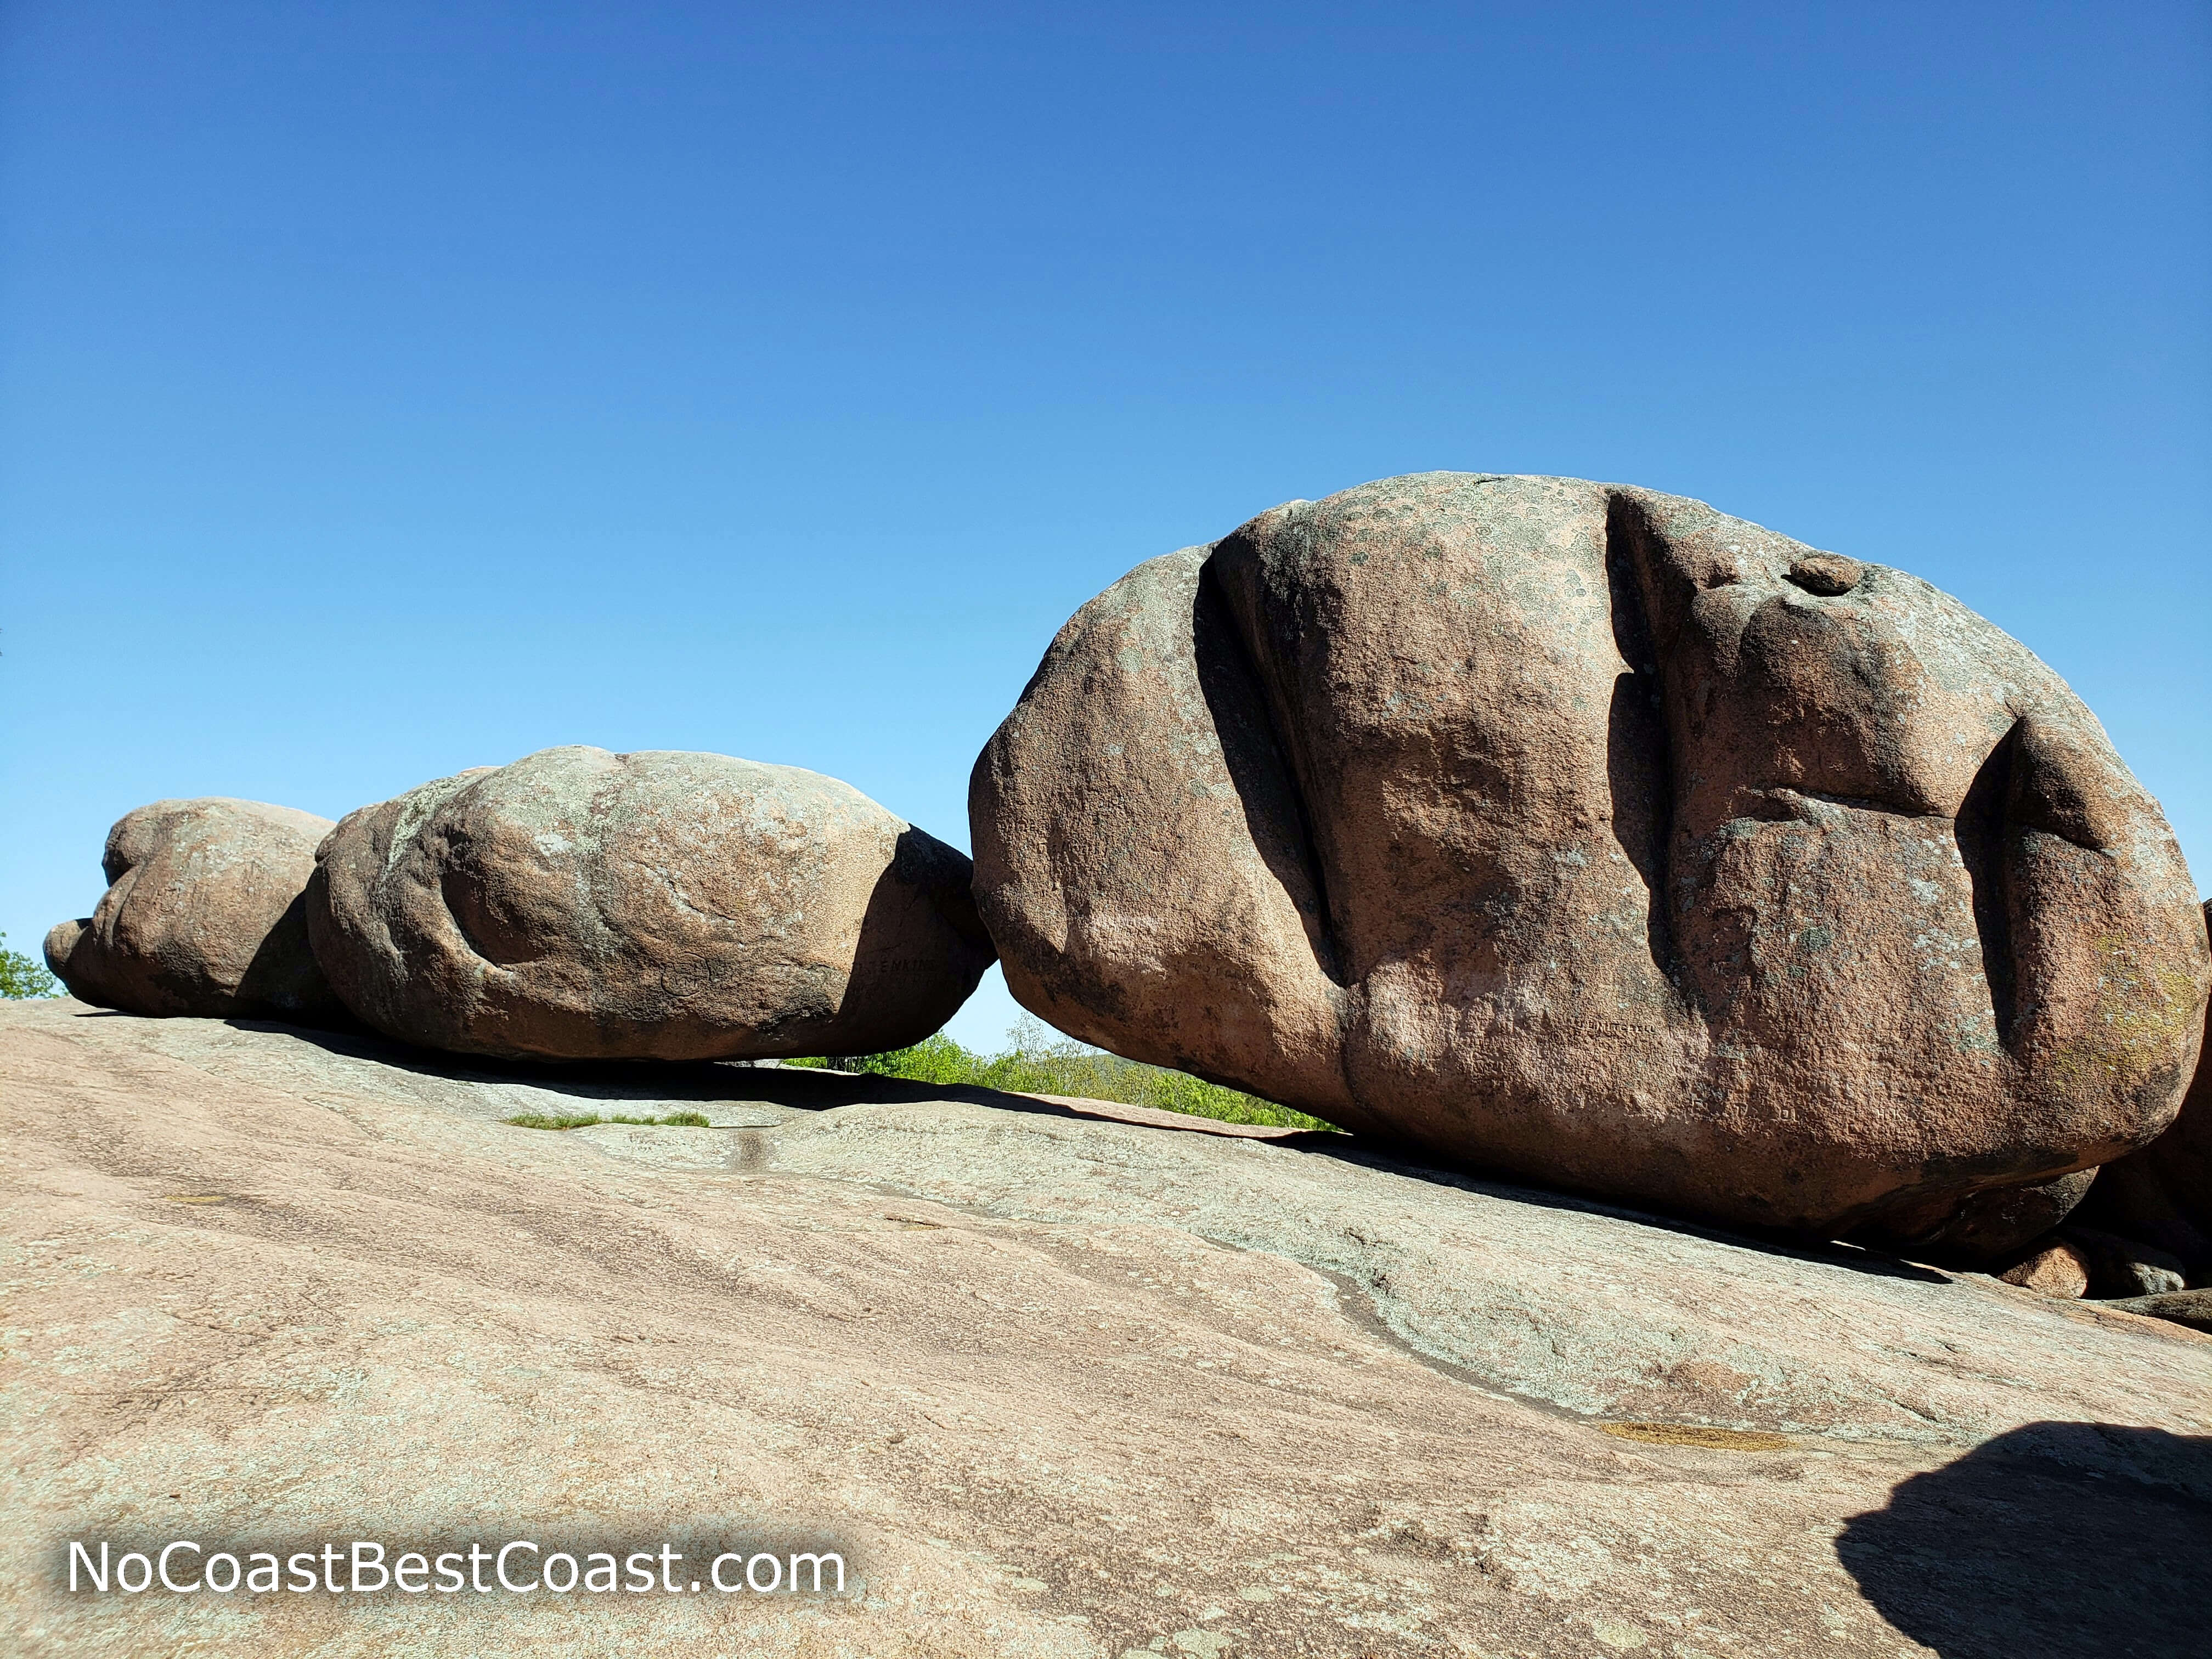 The park is named for these giant boulders that look like elephants standing in a line